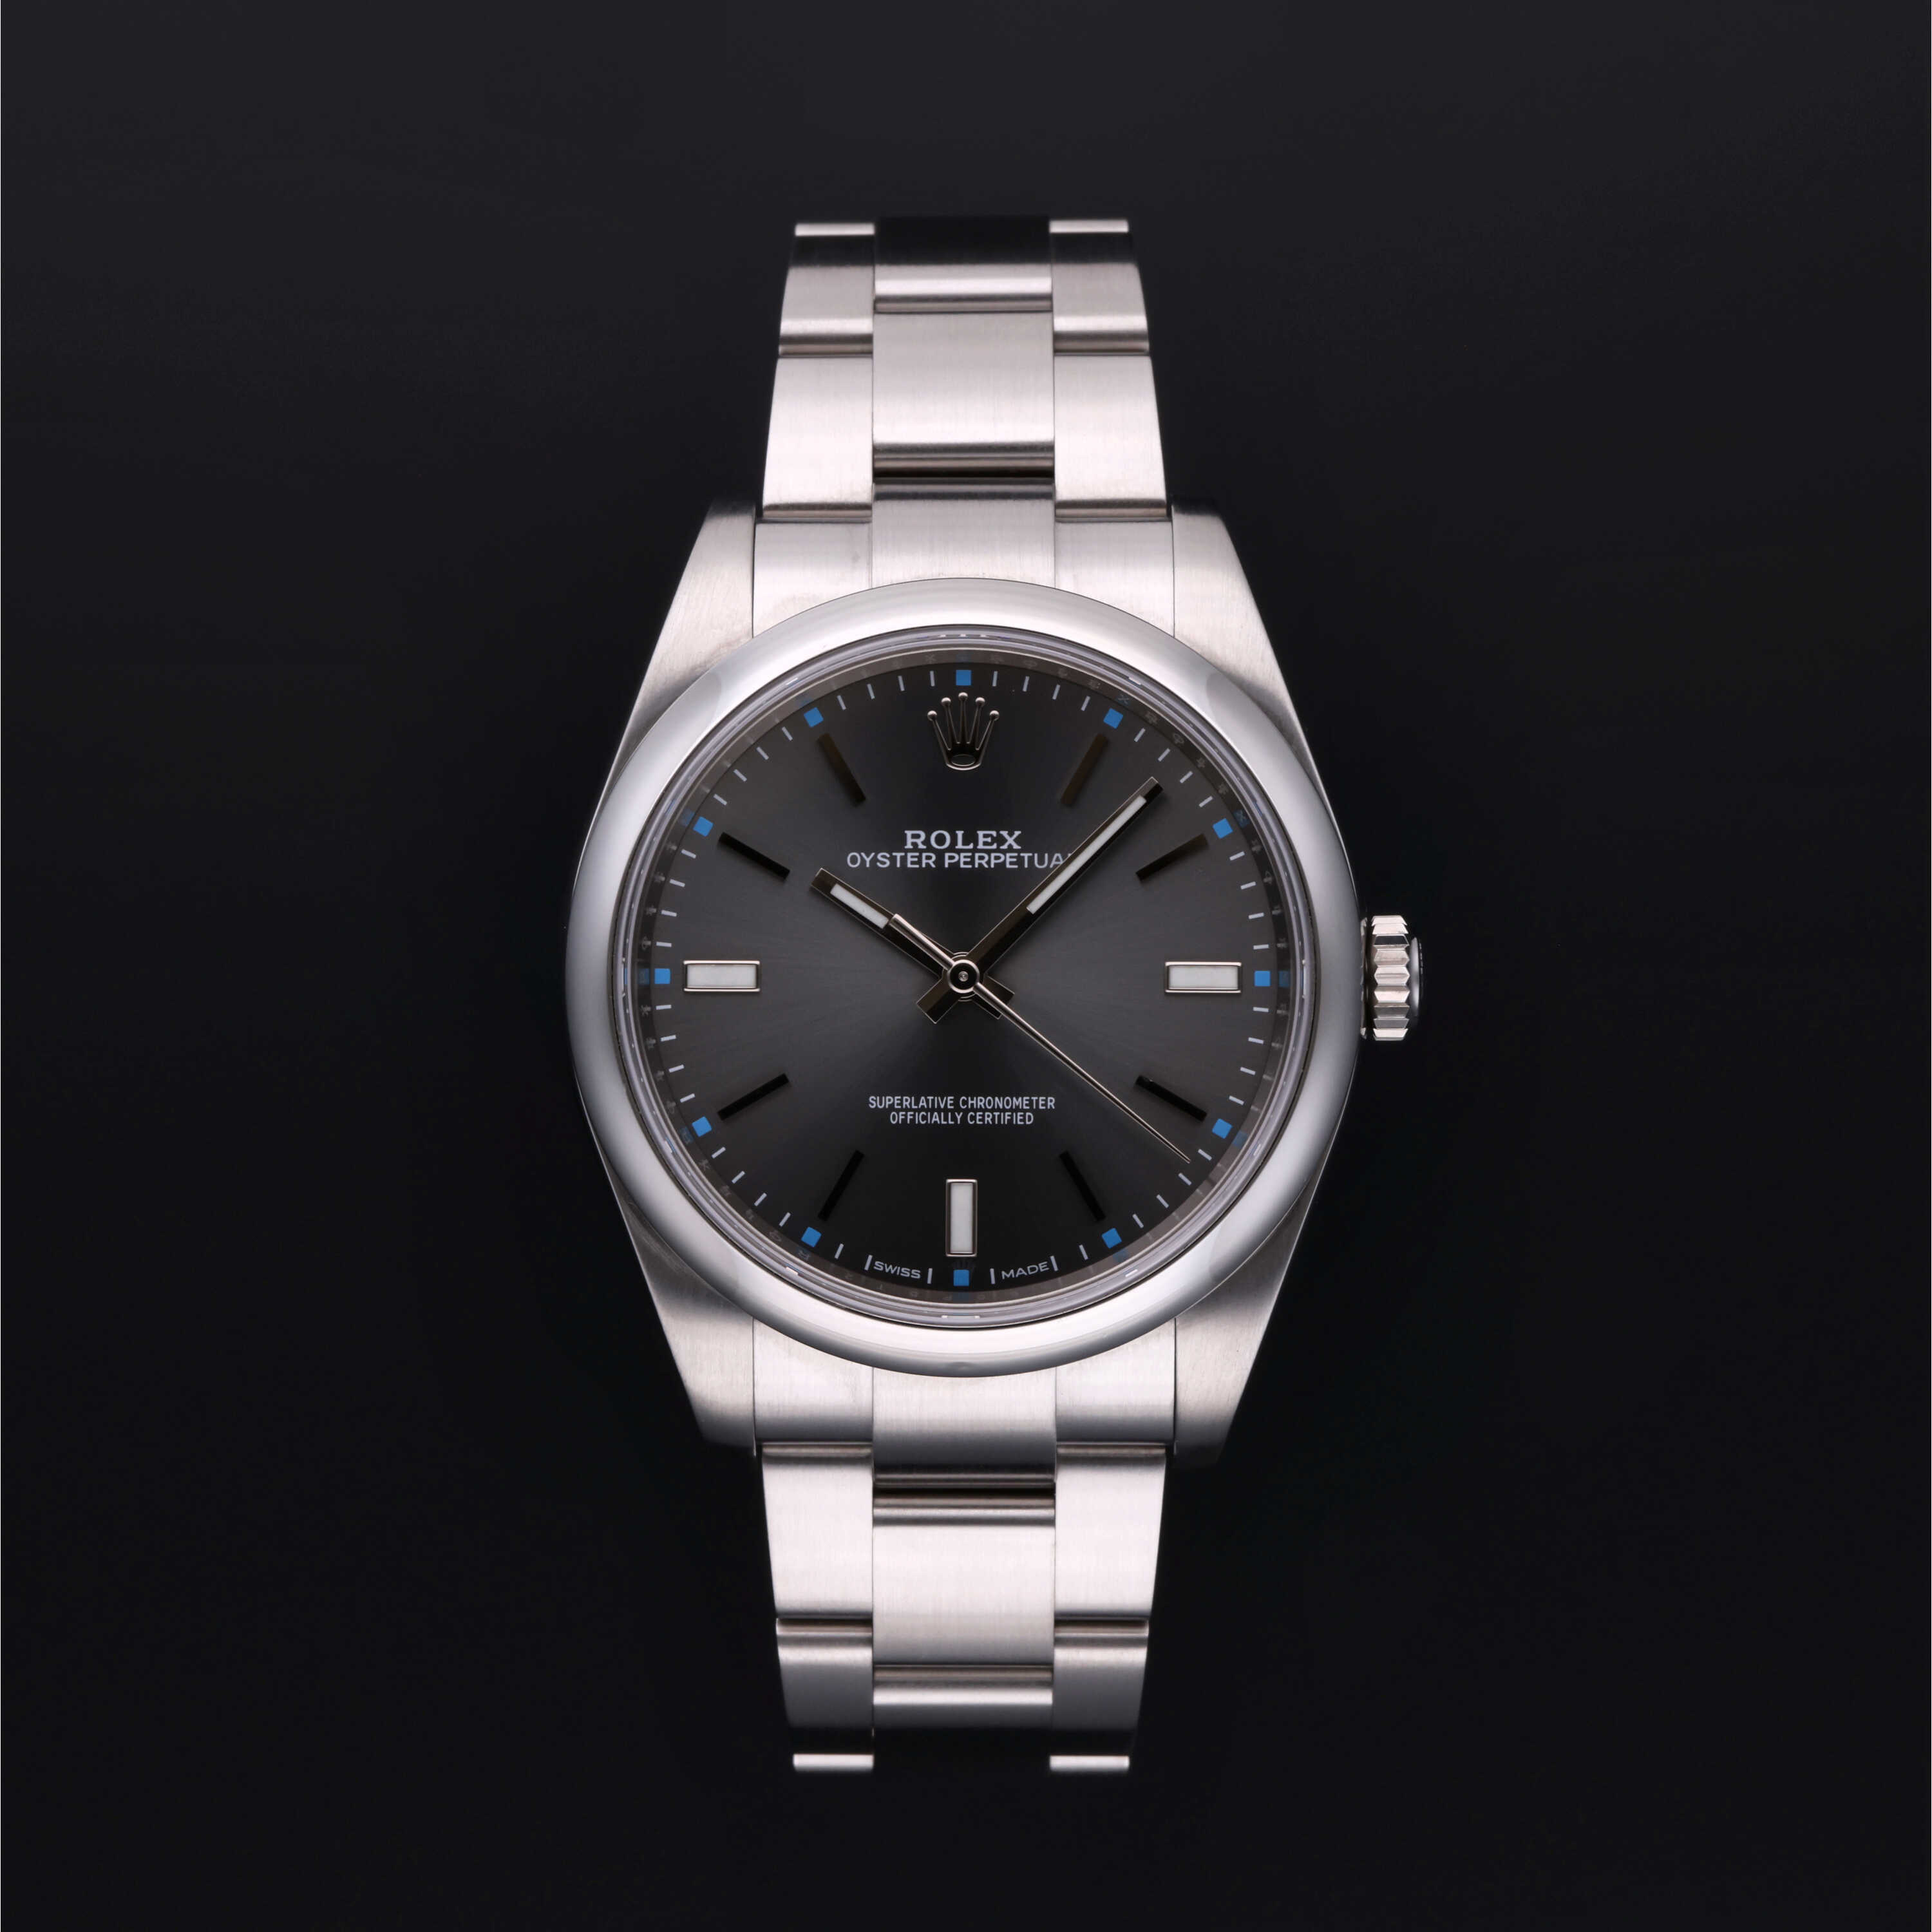 Certified Pre-Owned Oyster Perpetual 39 mm in Oystersteel, 114300 | Tourneau | Bucherer